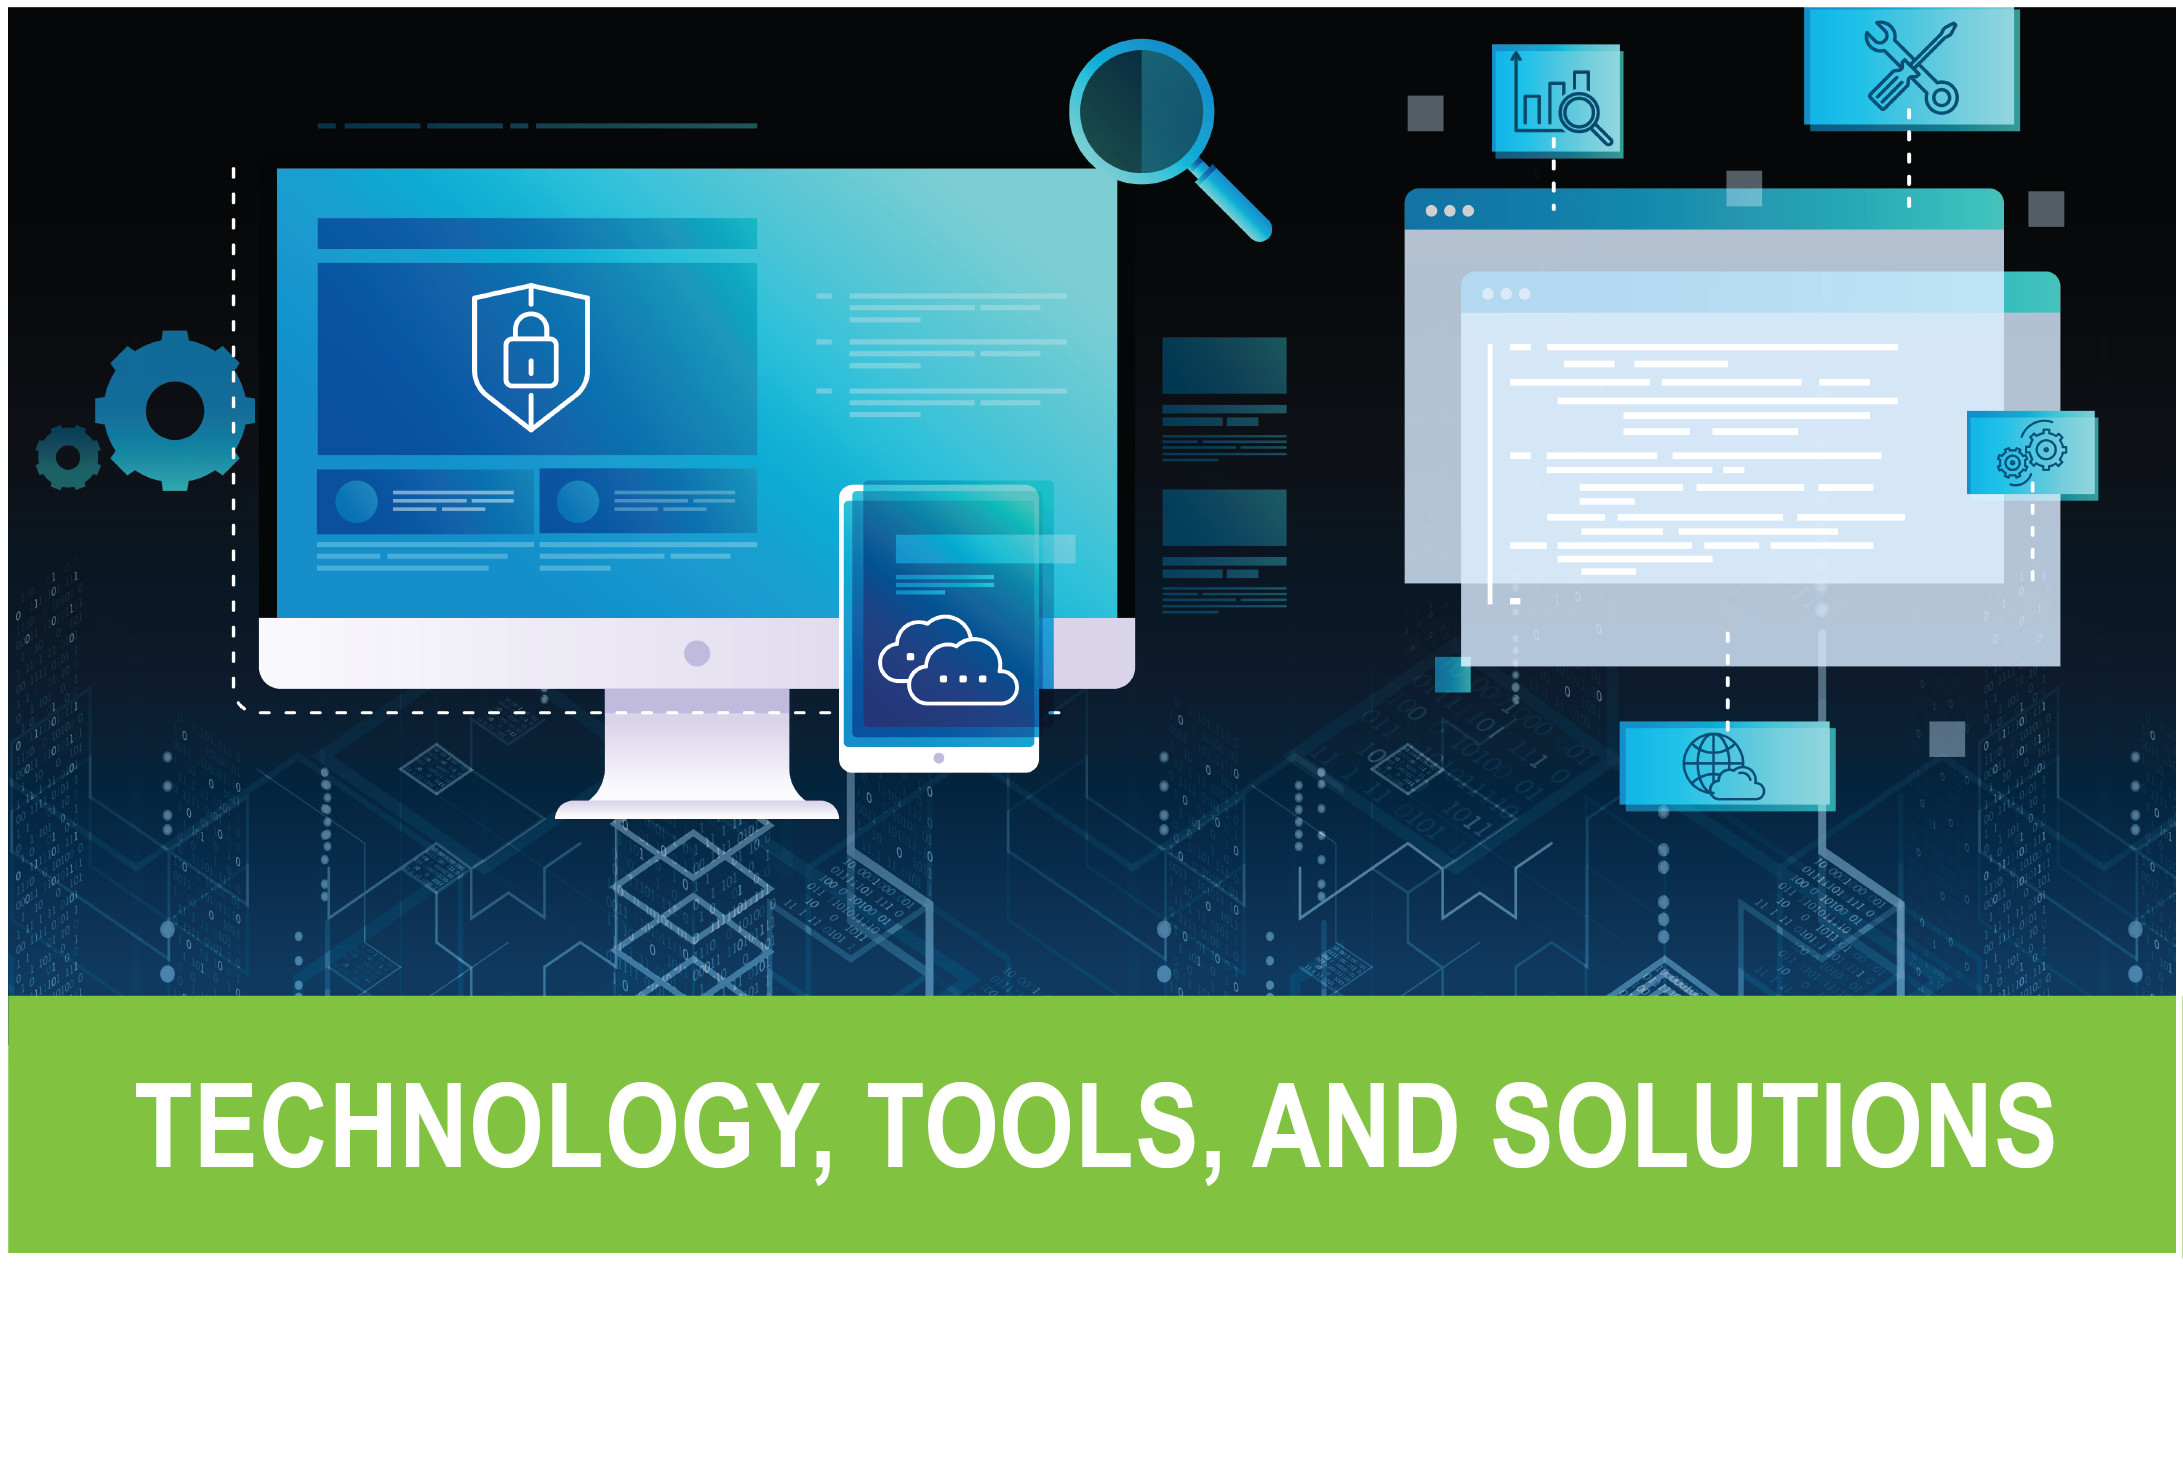 Technology, Tools, and Solutions